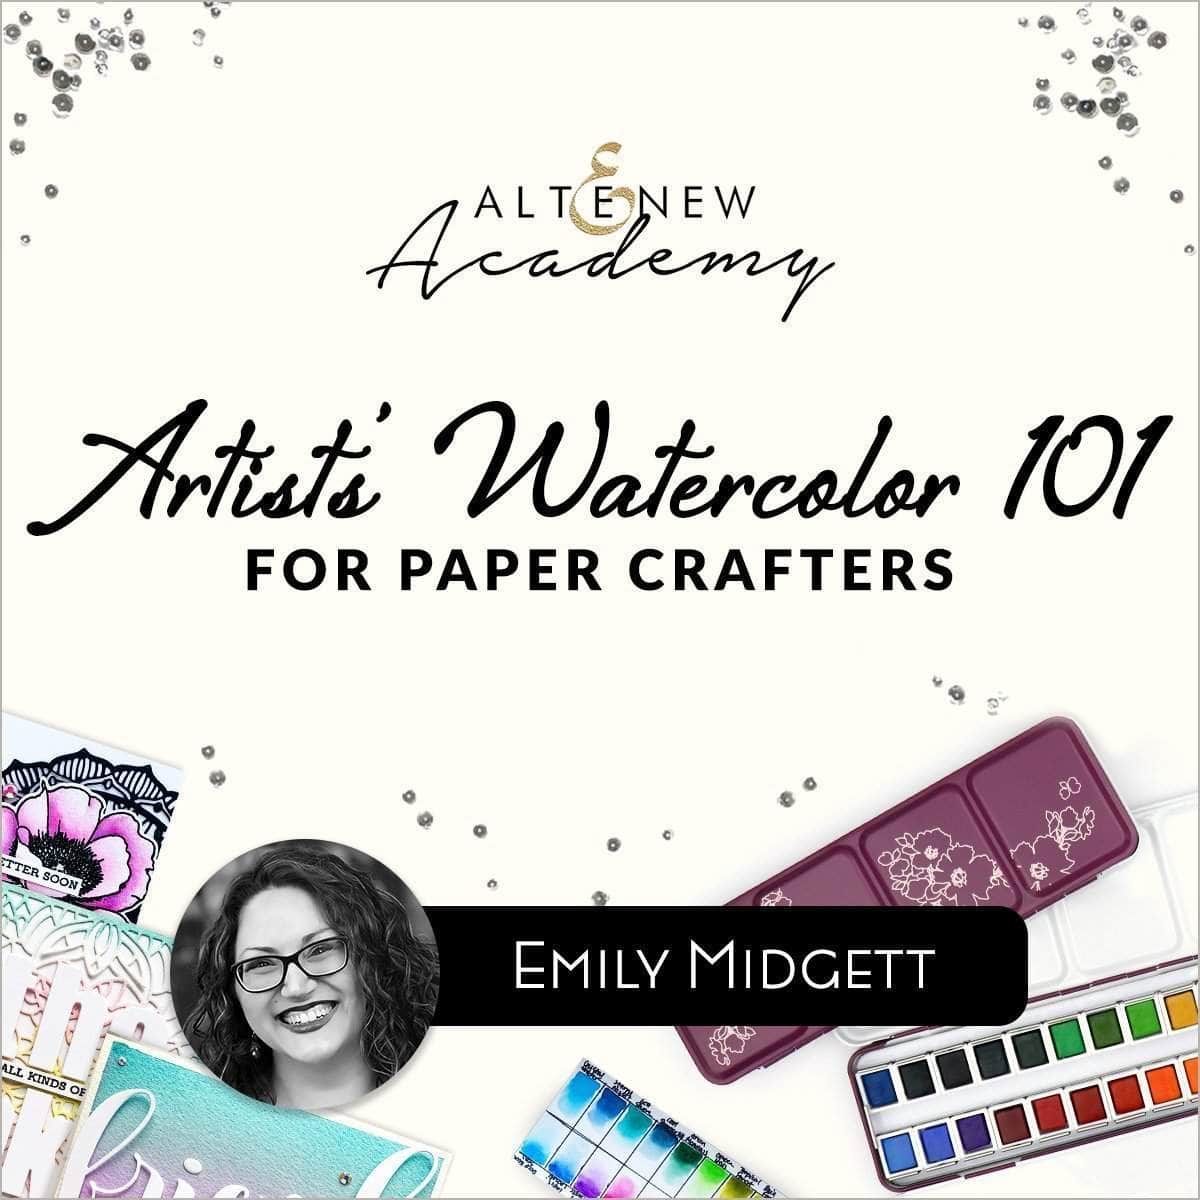 Altenew Class Artists Watercolor 101 for Paper Crafters Online Cardmaking Class